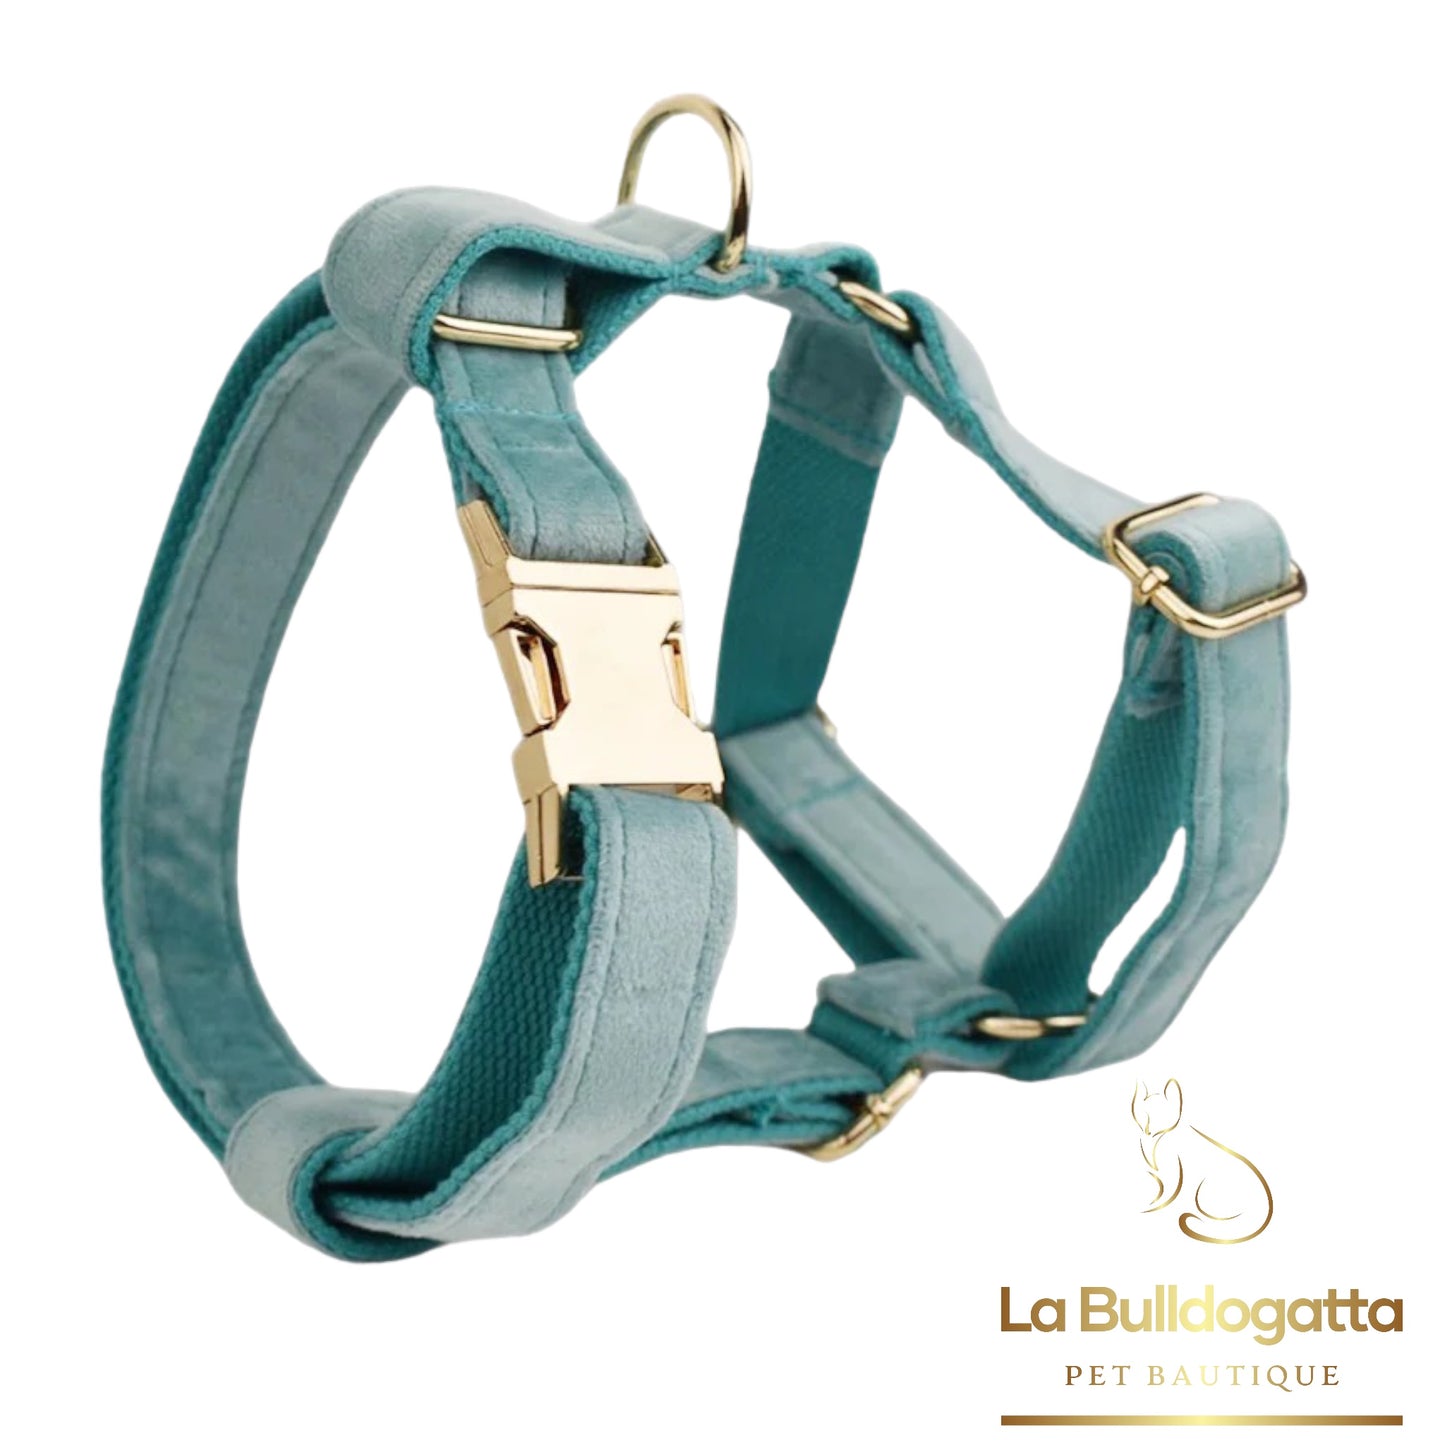 H-shaped harness, leash and tiffany green velvet bow set